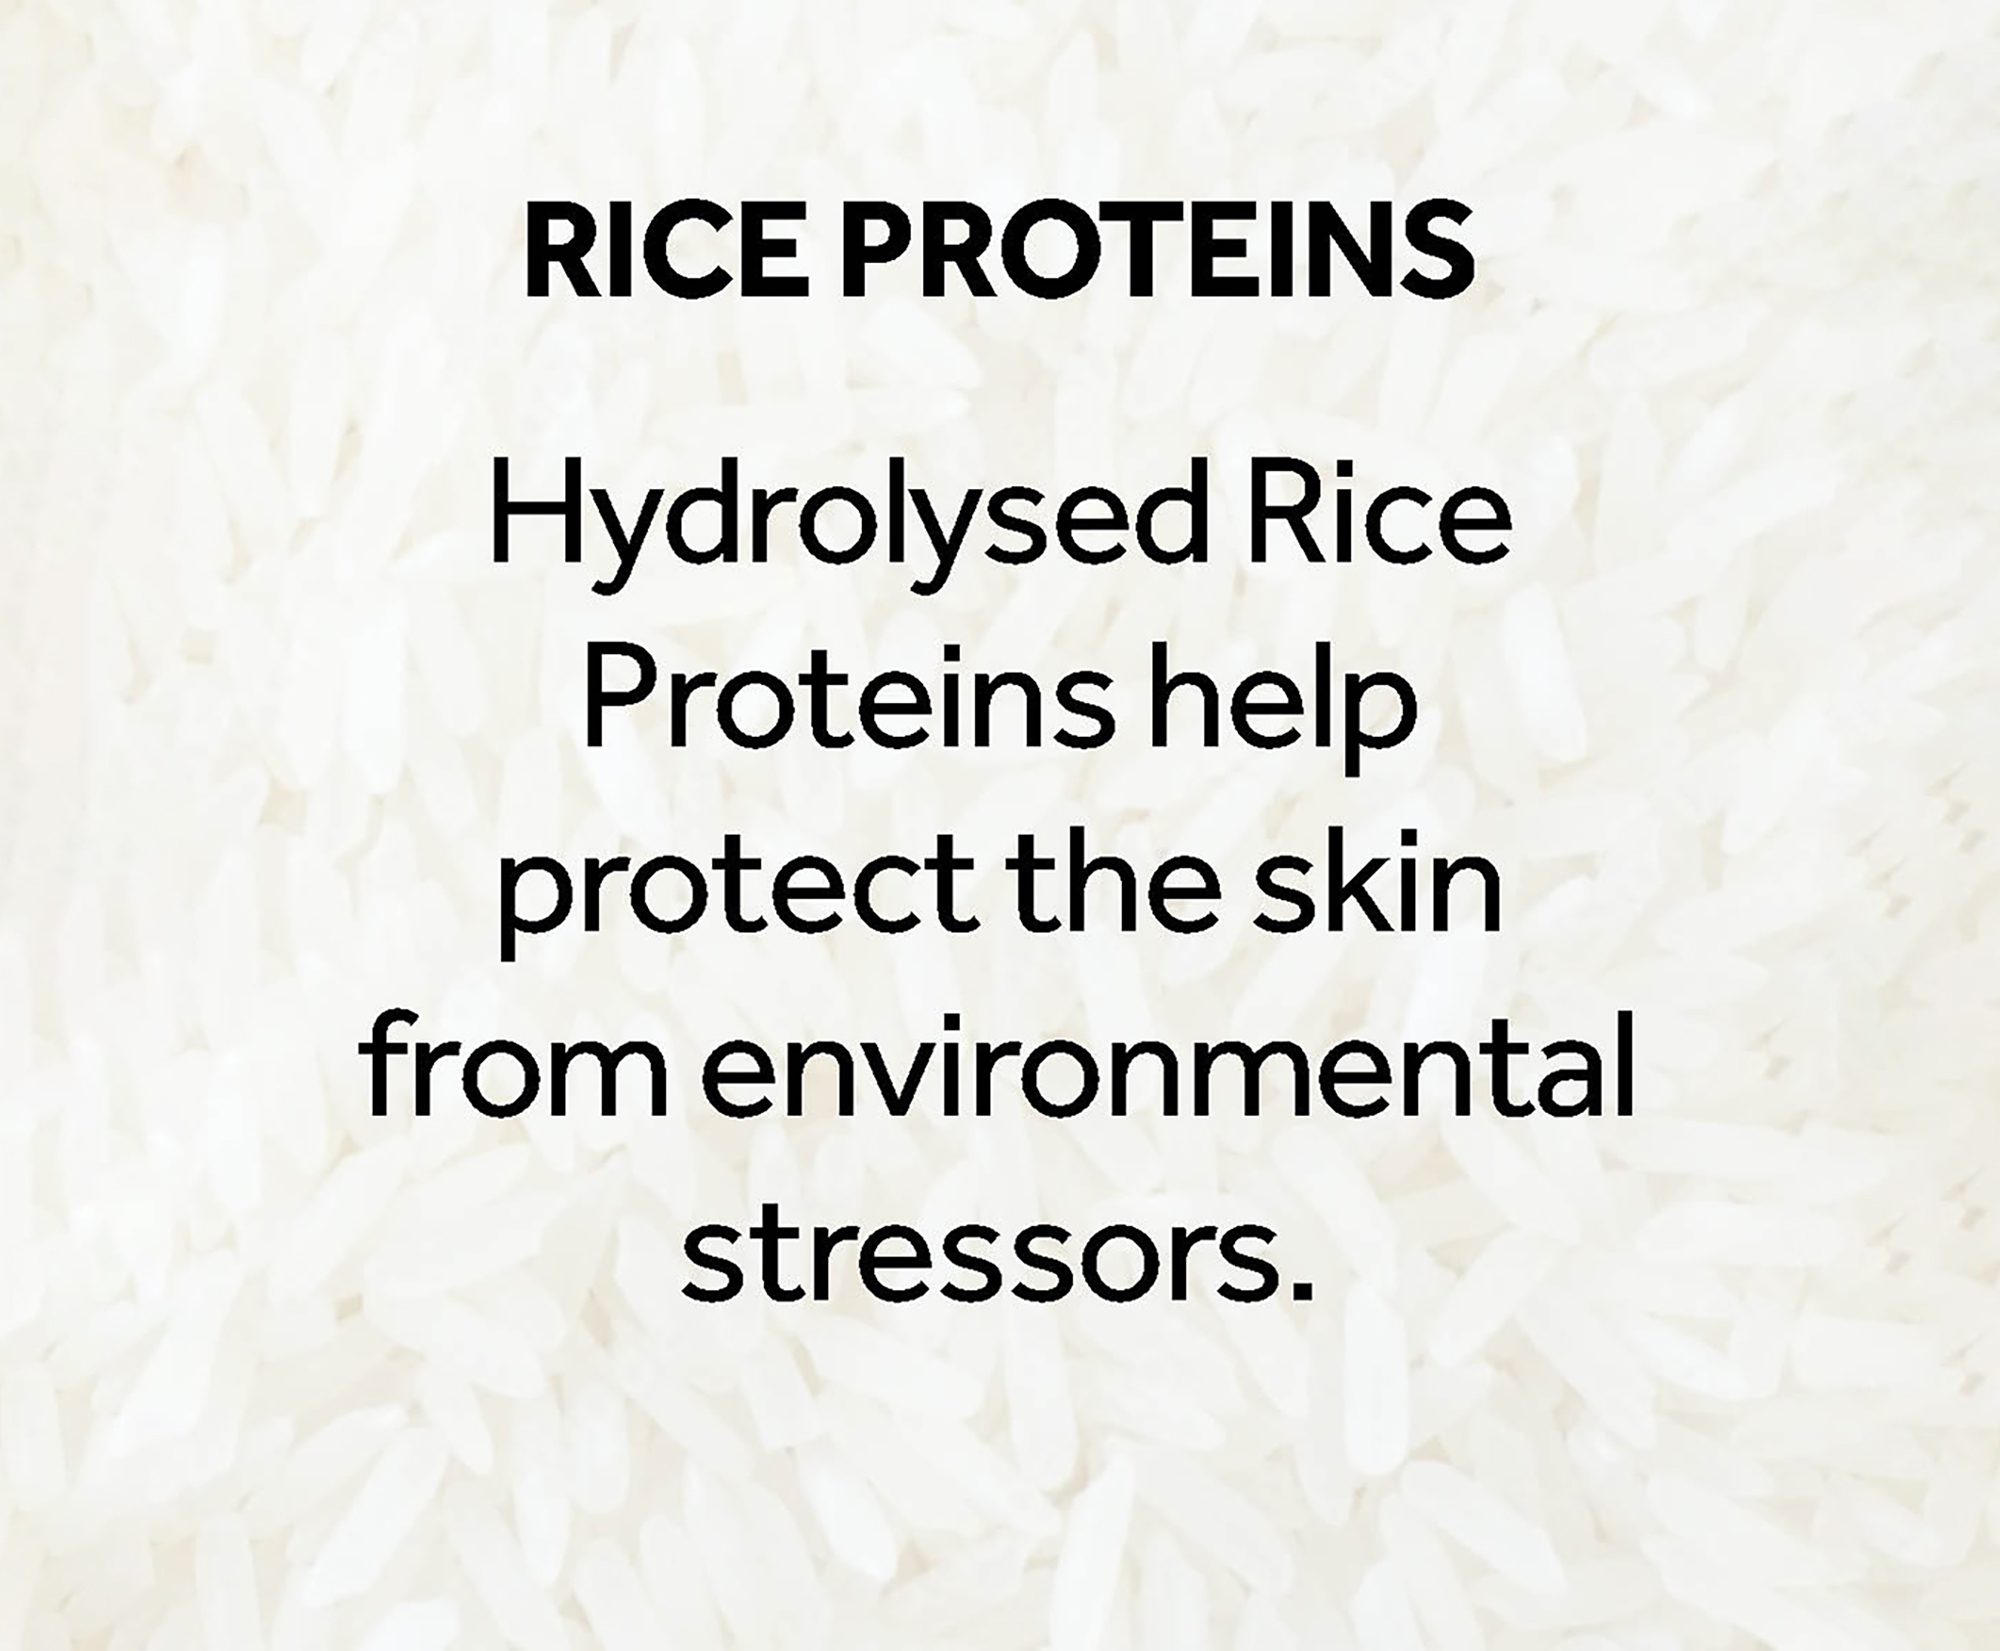 Rice proteins. Hydrolysed Rice Proteins help protect the skin from environmental stressors.